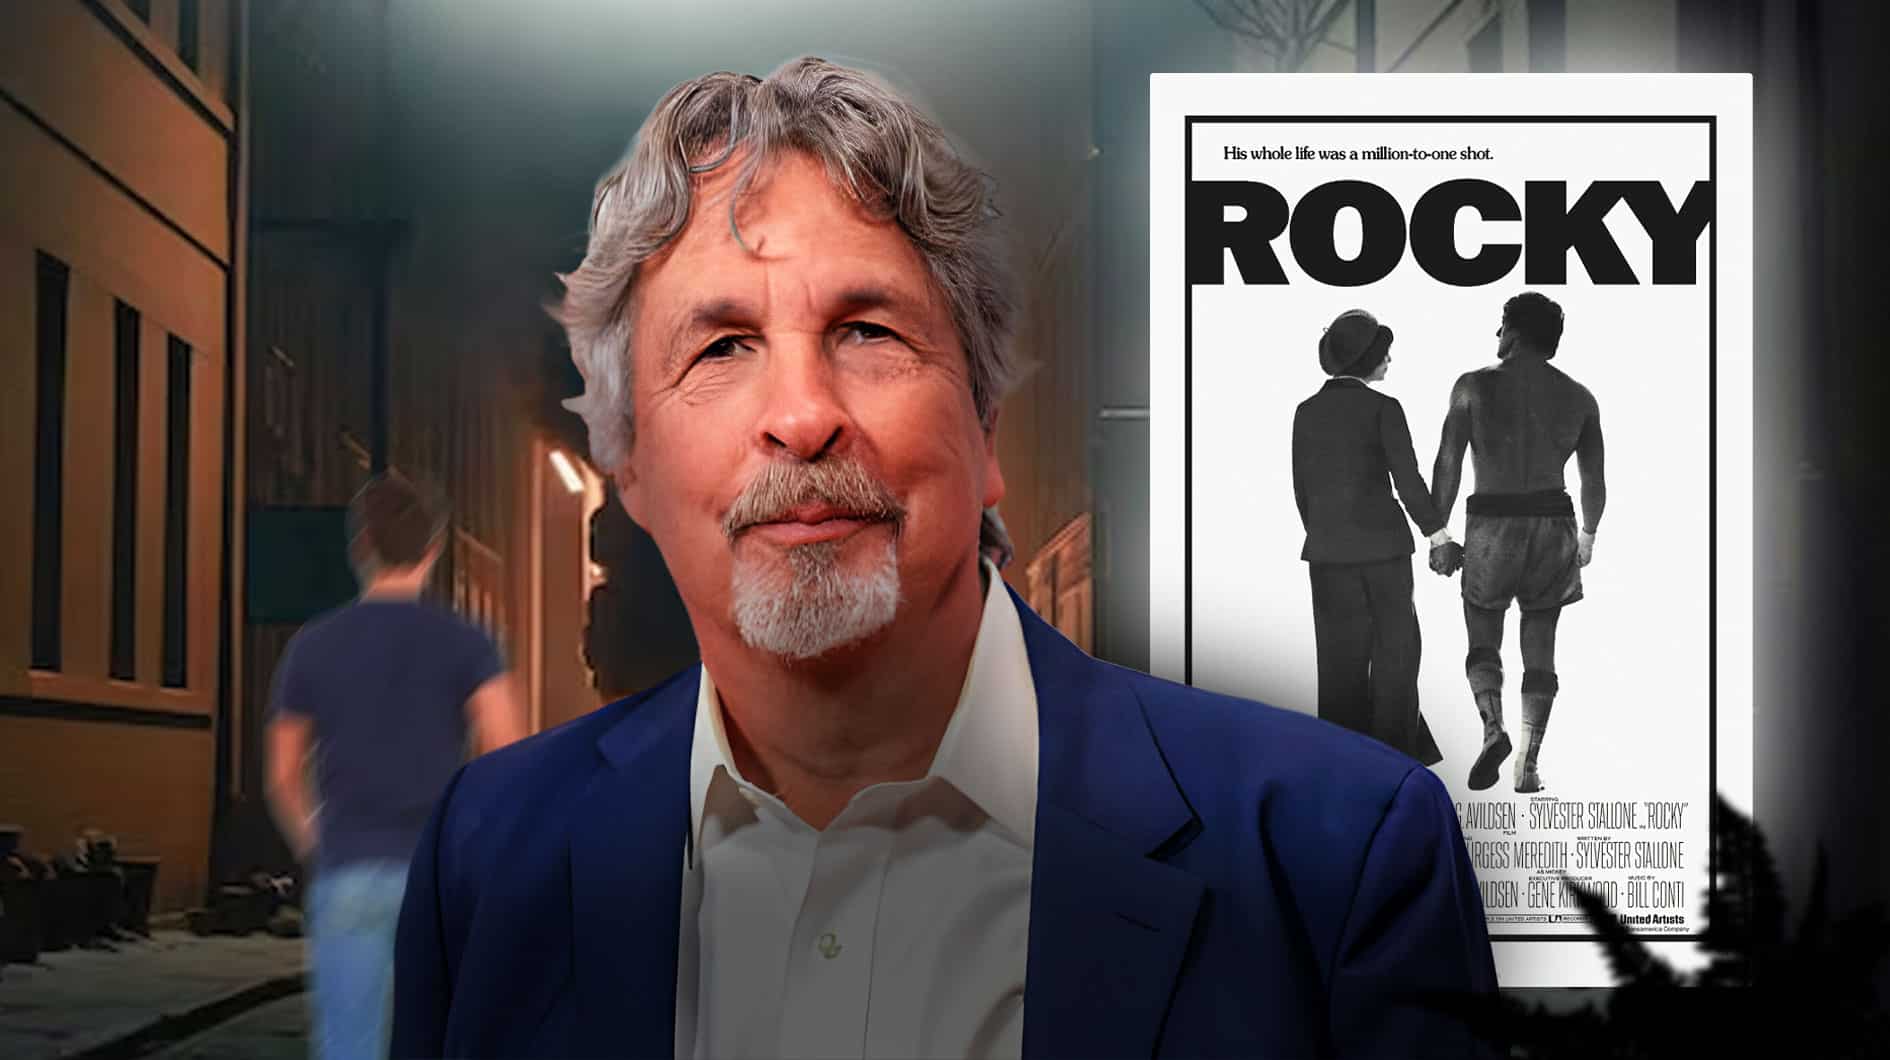 Making of Rocky film announced with Green Book twist